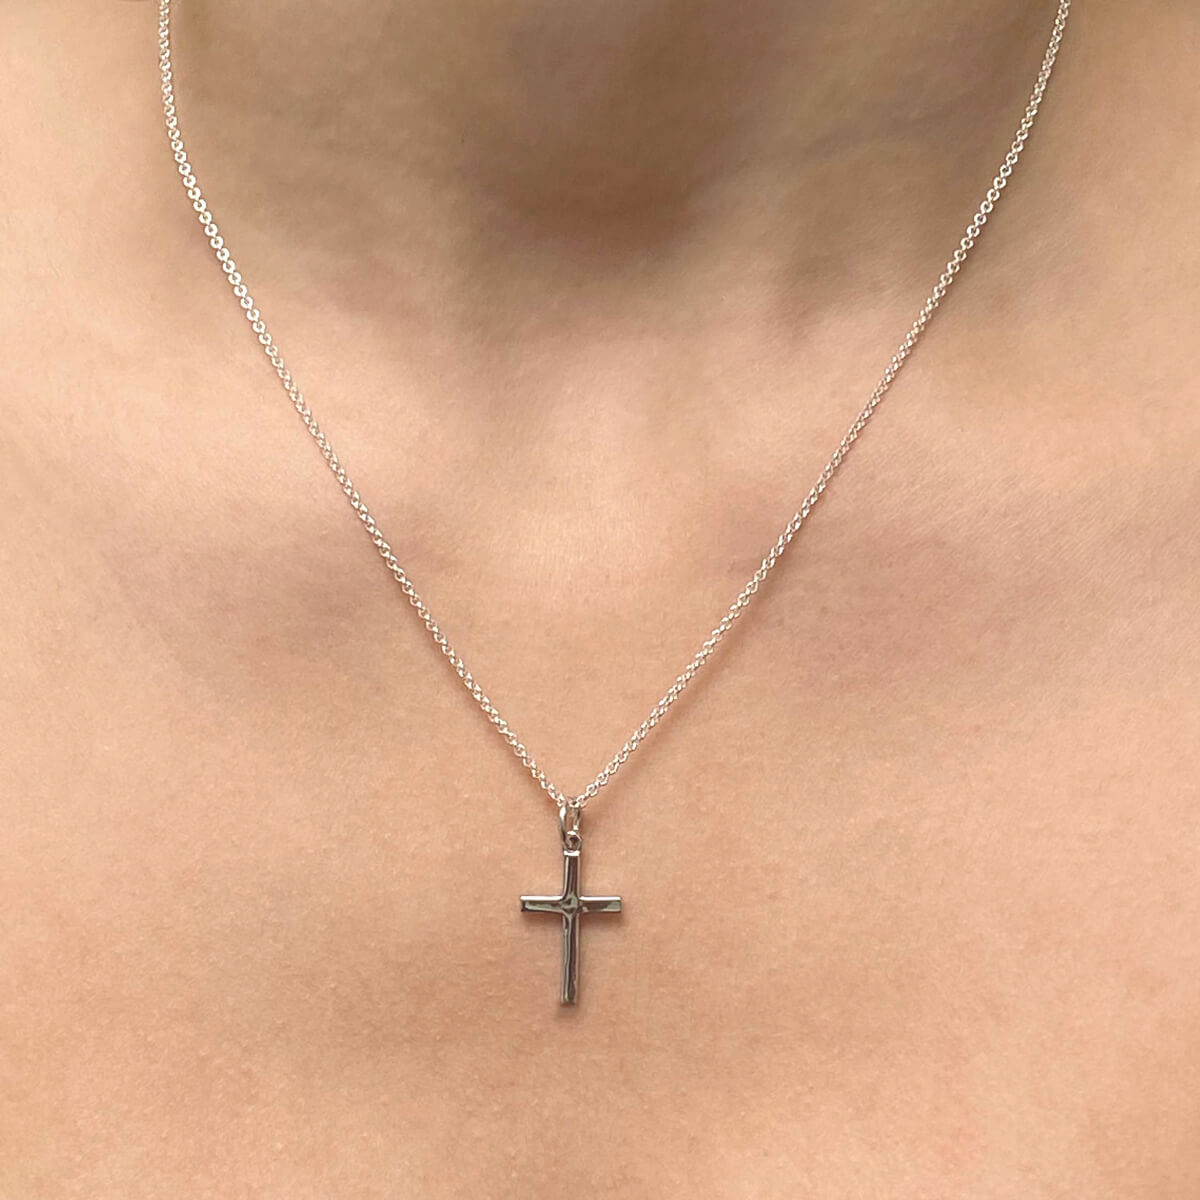 Simple Cross Necklace Sterling Silver Jewelry